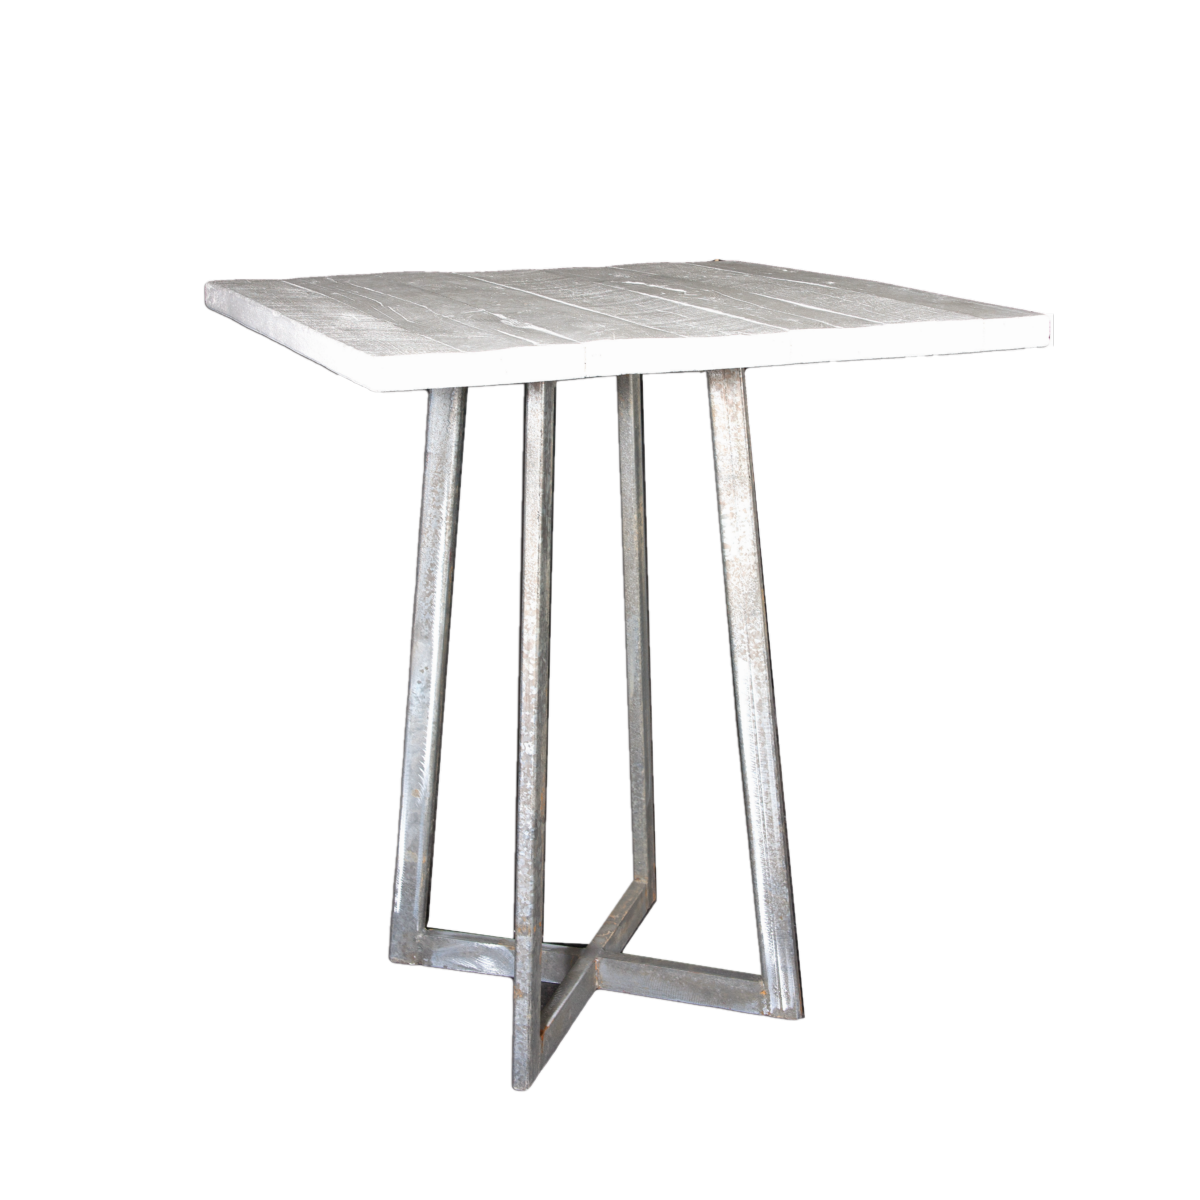 Featured image for “Zoid Bois Pub Table”